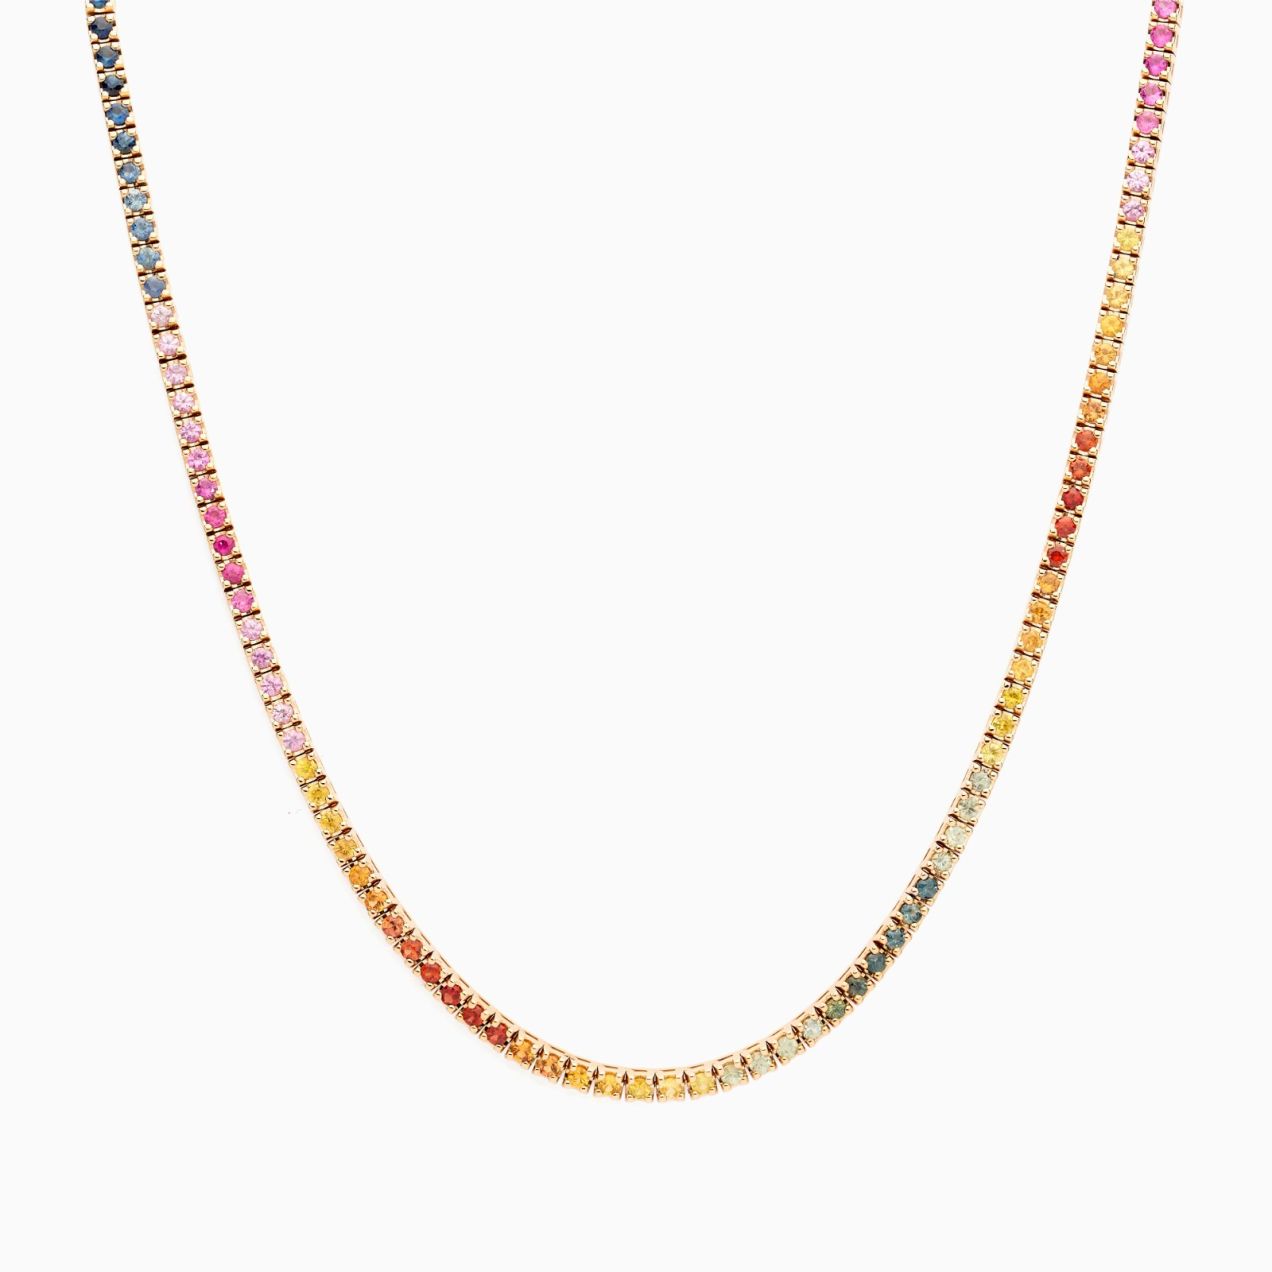 Rose gold riviere necklace with multicoloured sapphires